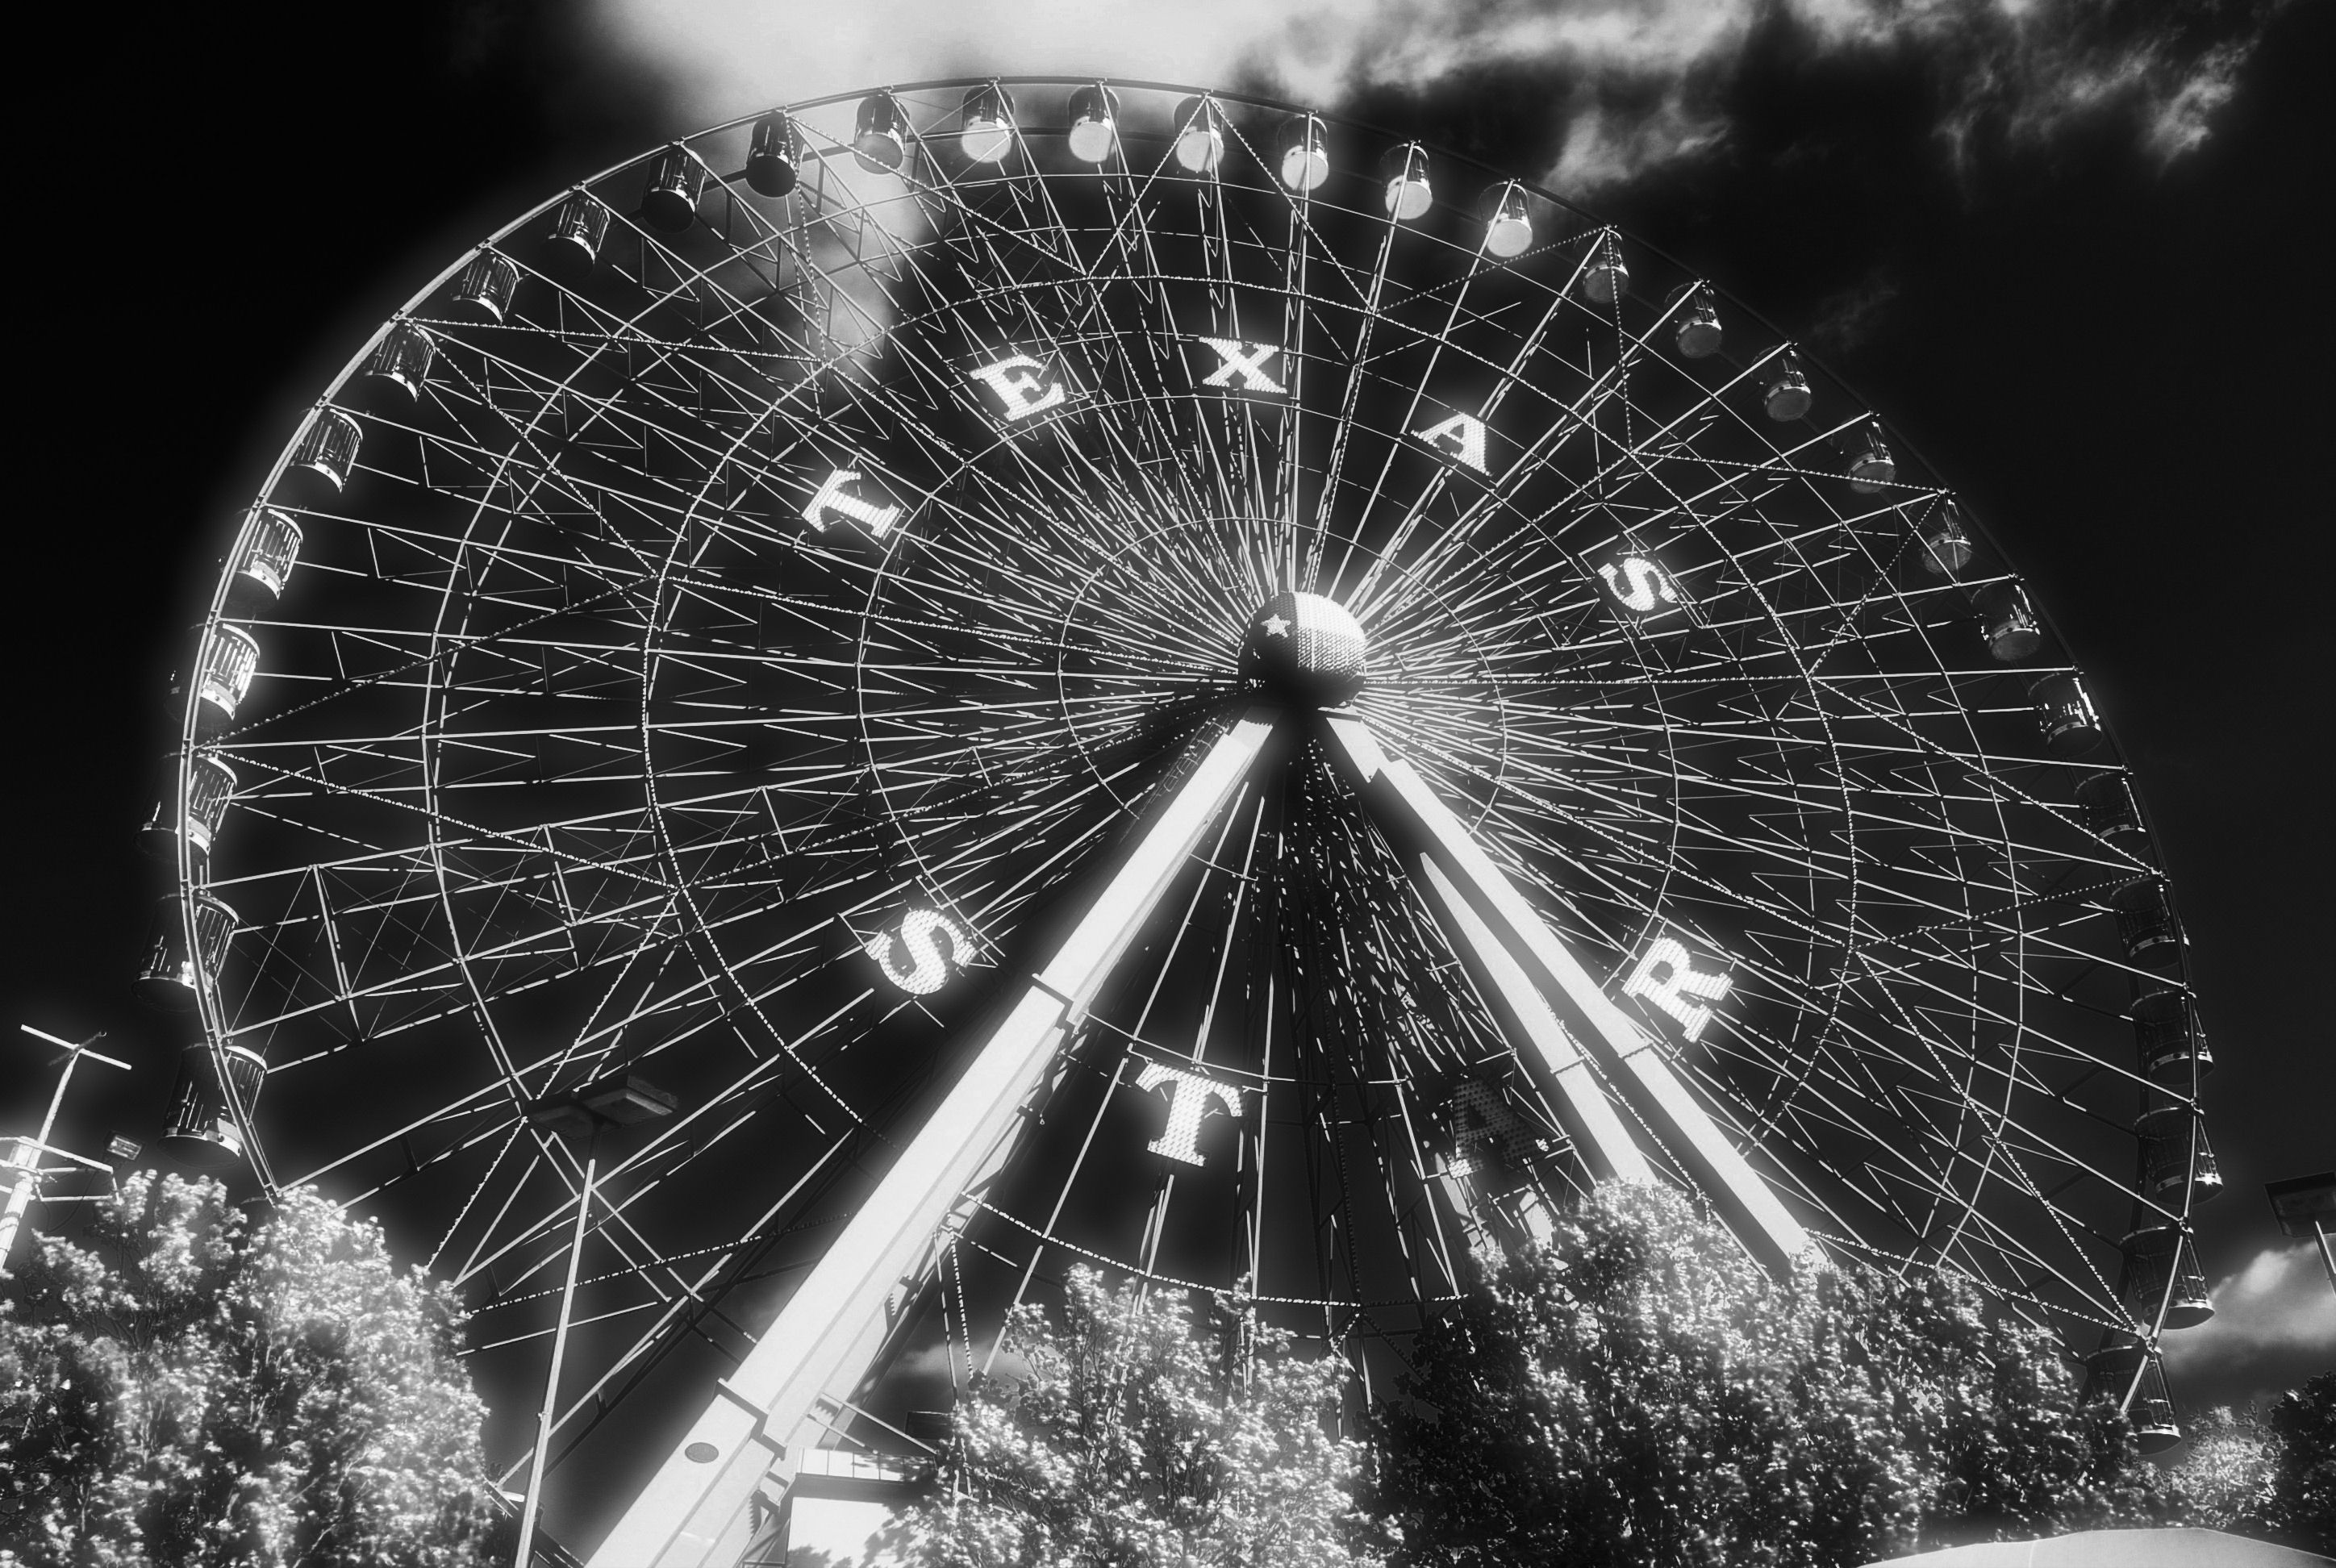 File:Texas Star Black and White 2007 - Wikimedia Commons